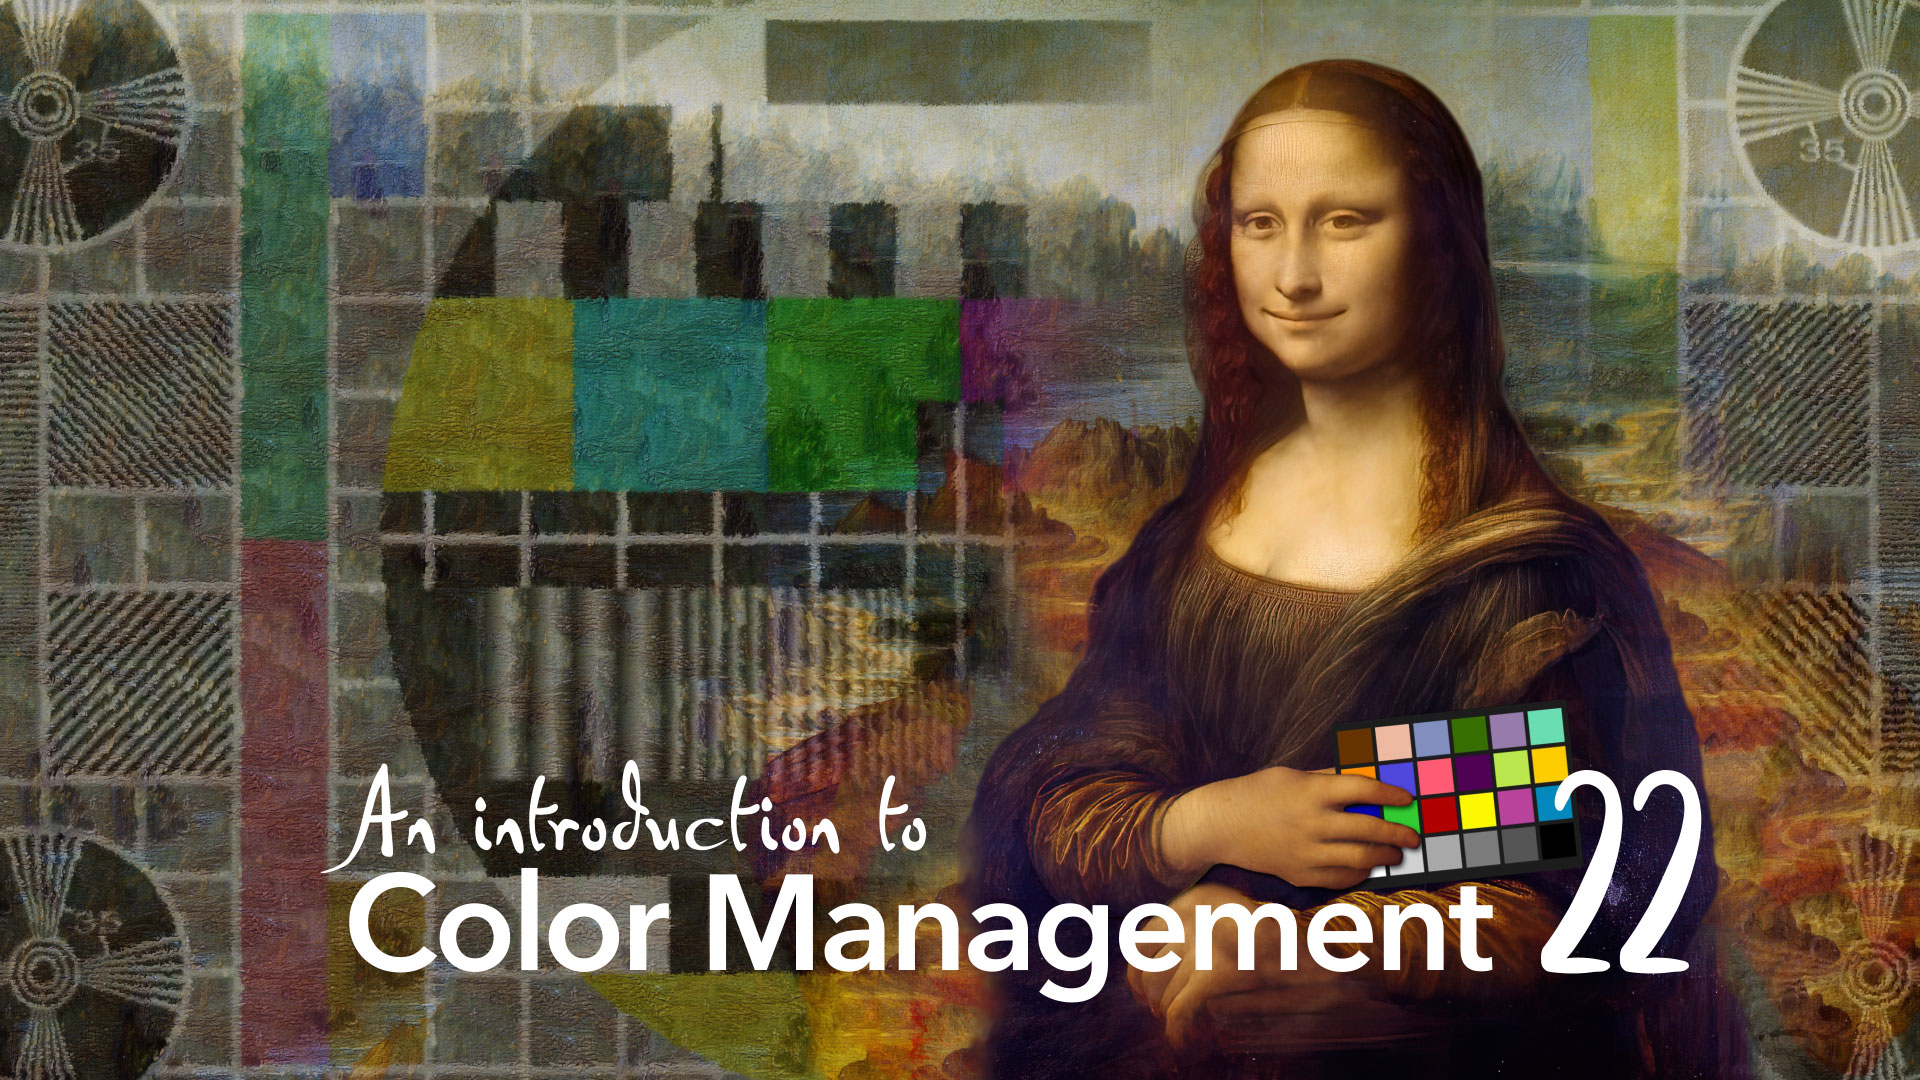 Color Management Part 22: Introducing Tone Mapping 3